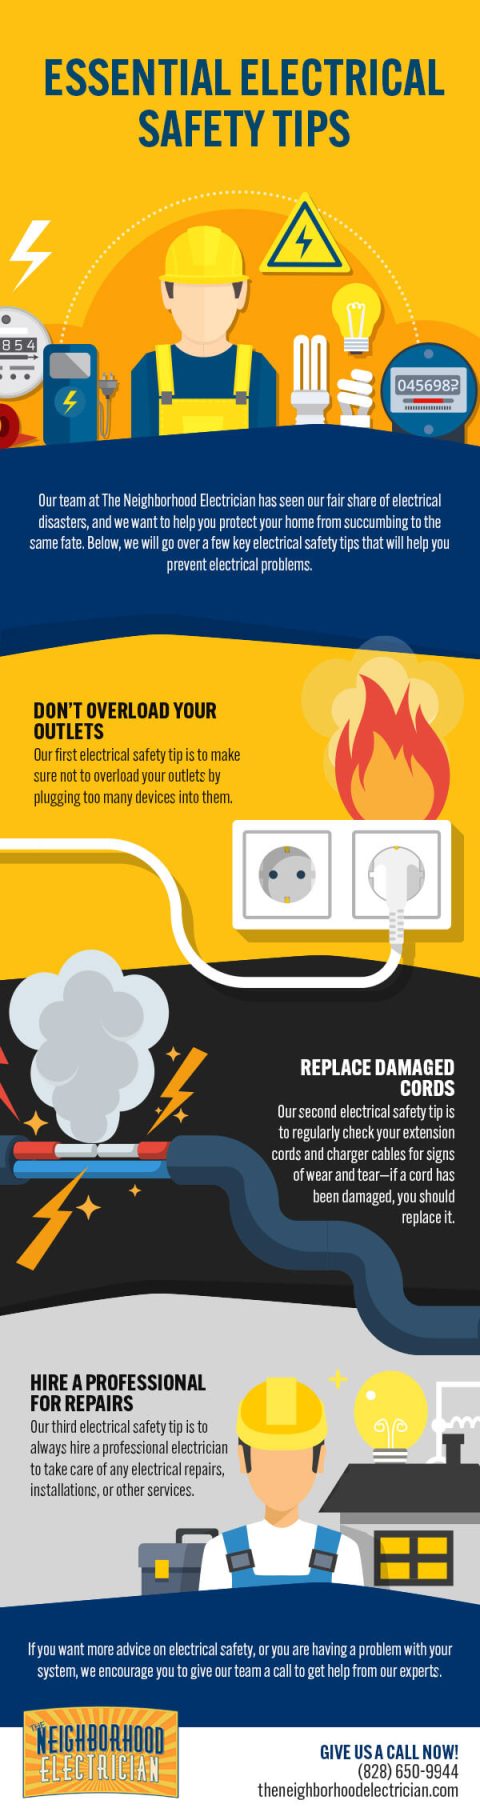 Essential Electrical Safety Tips [infographic] | The Neighborhood ...